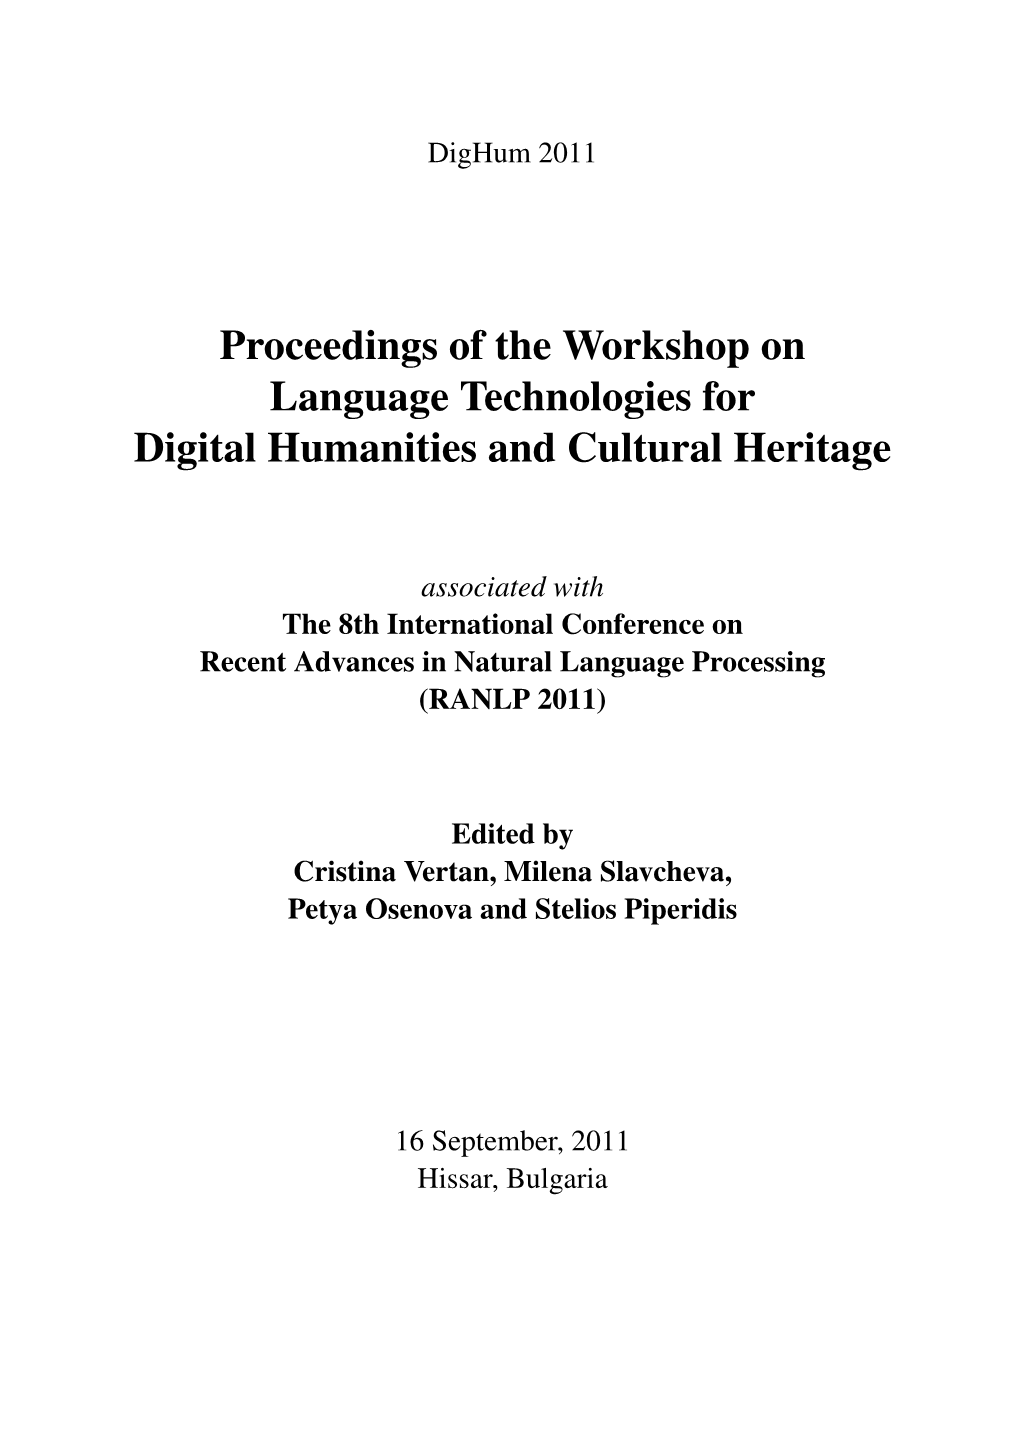 Proceedings of the Workshop on Language Technologies for Digital Humanities and Cultural Heritage